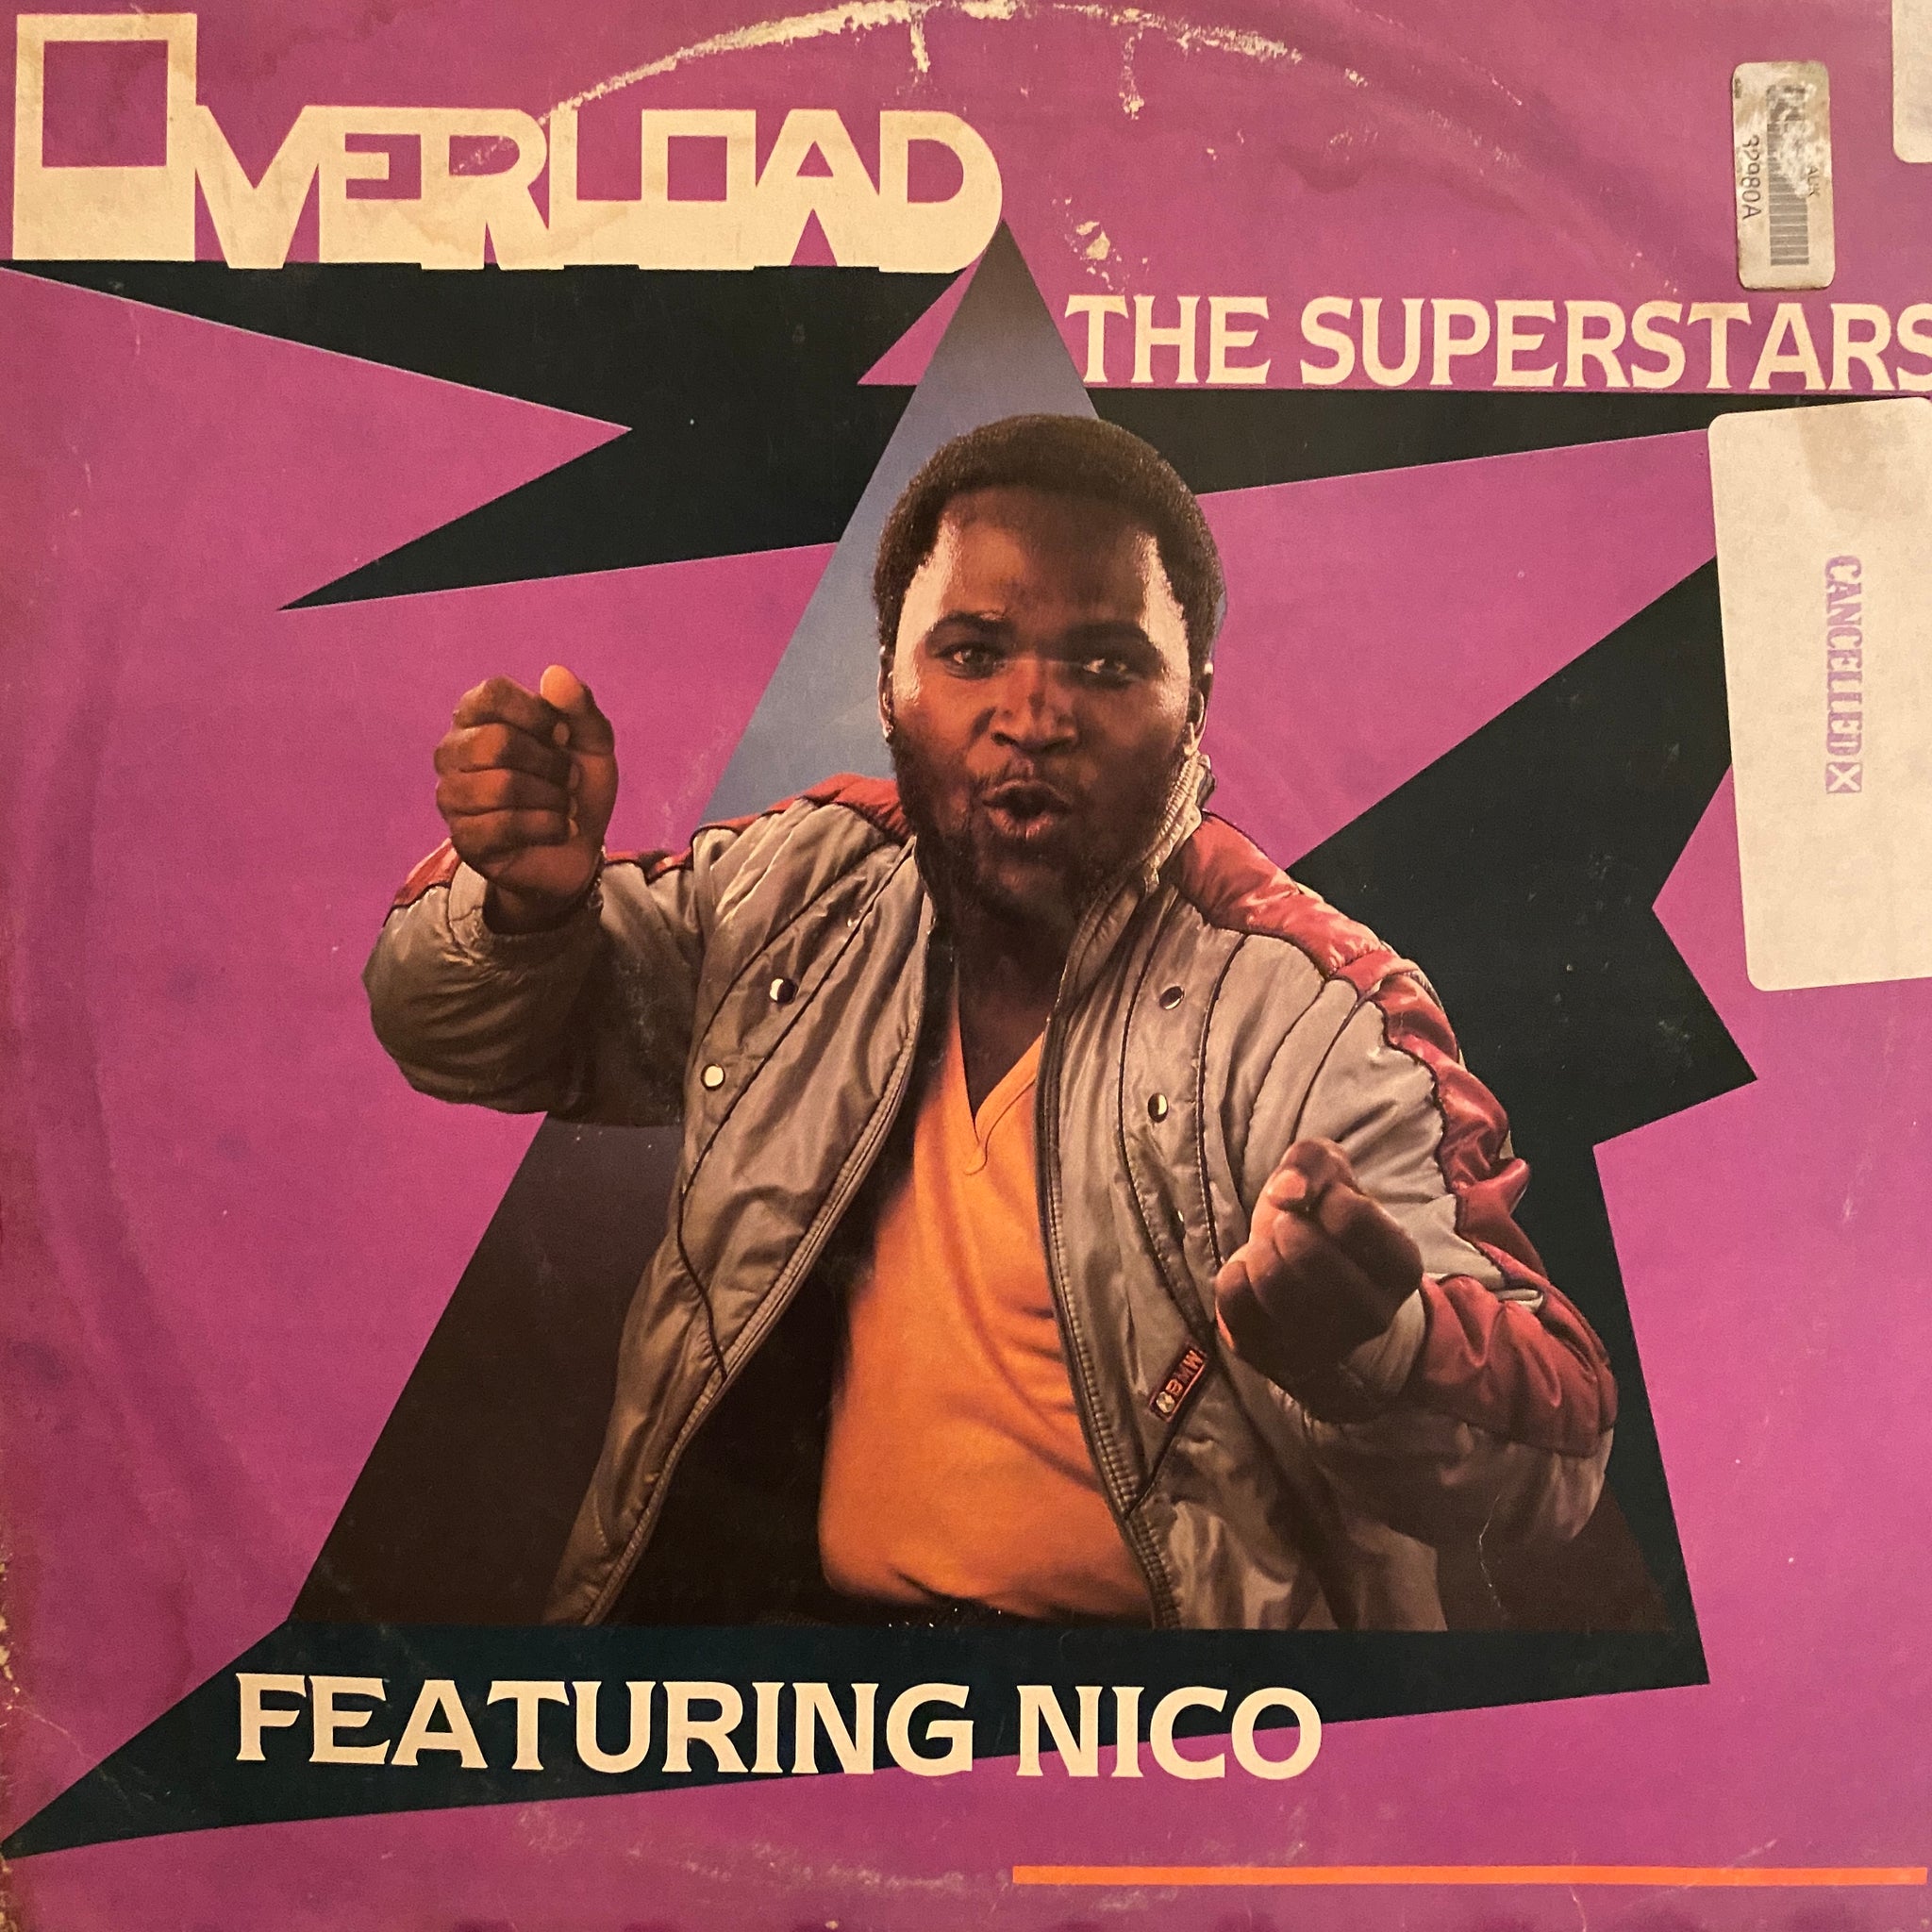 The Superstars featuring Nico ‎– Overload